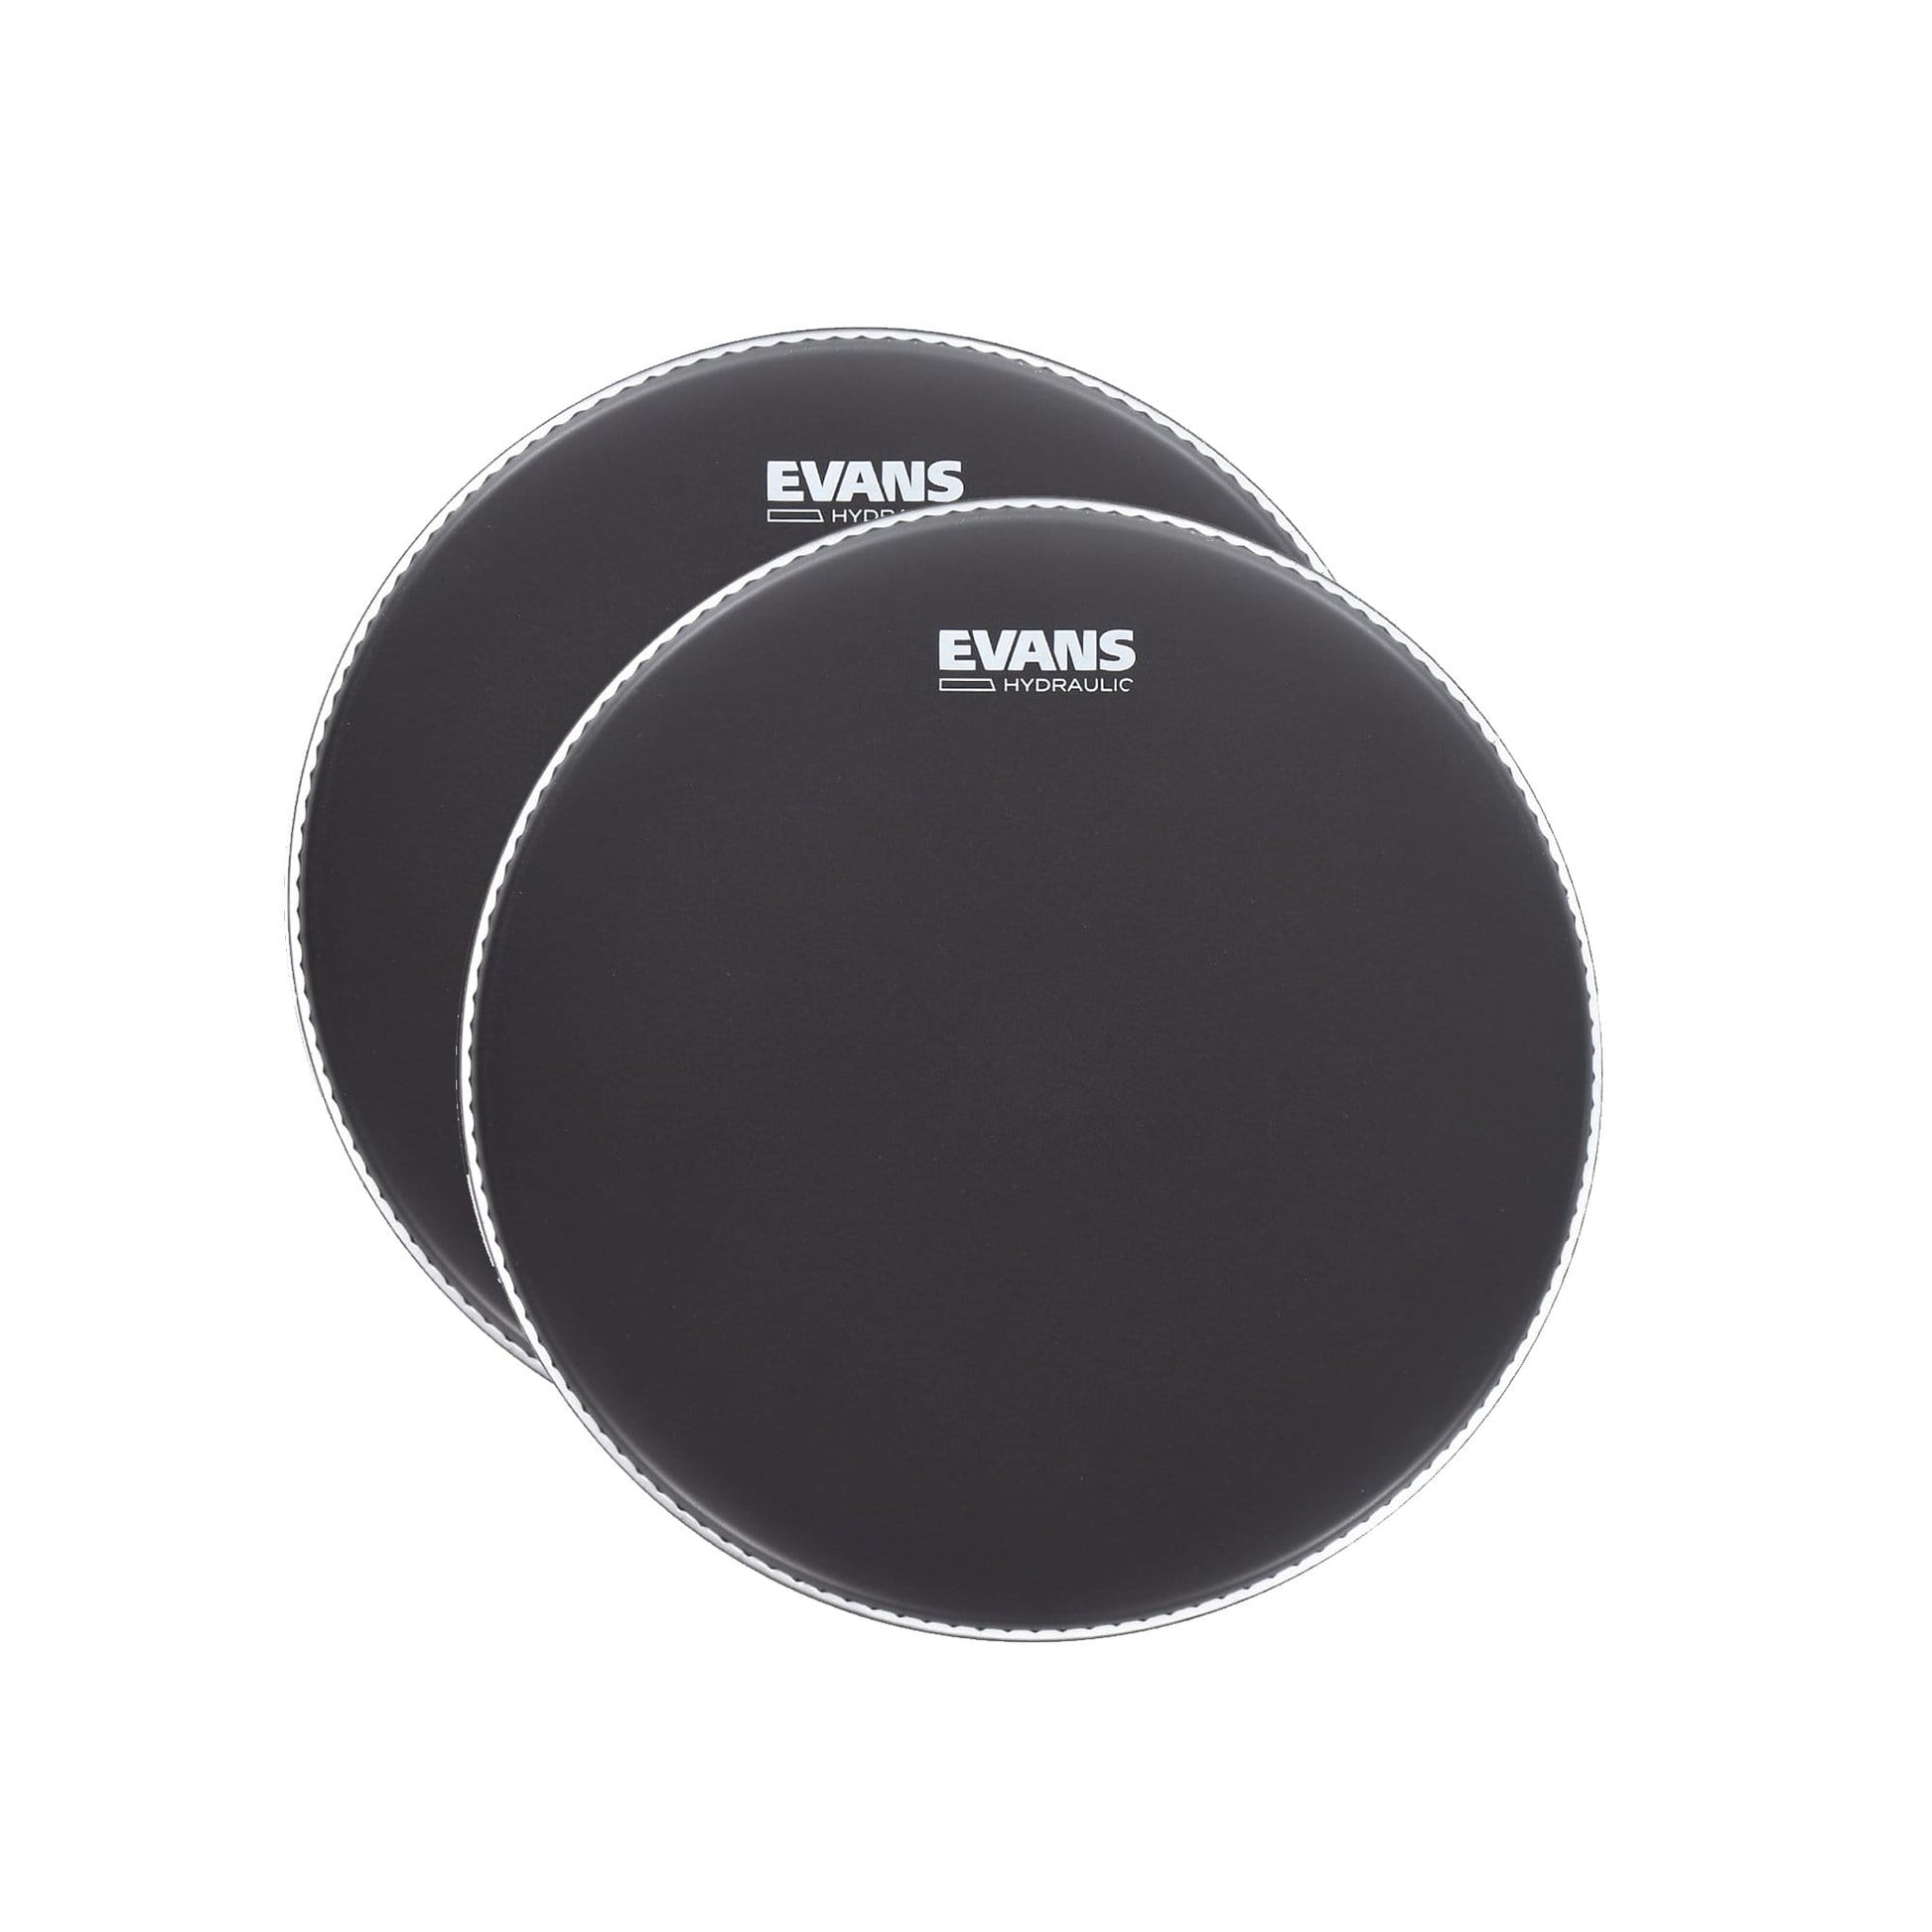 Evans 14" Hydraulic Black Coated Snare Drum Head (2 Pack Bundle) Drums and Percussion / Parts and Accessories / Heads